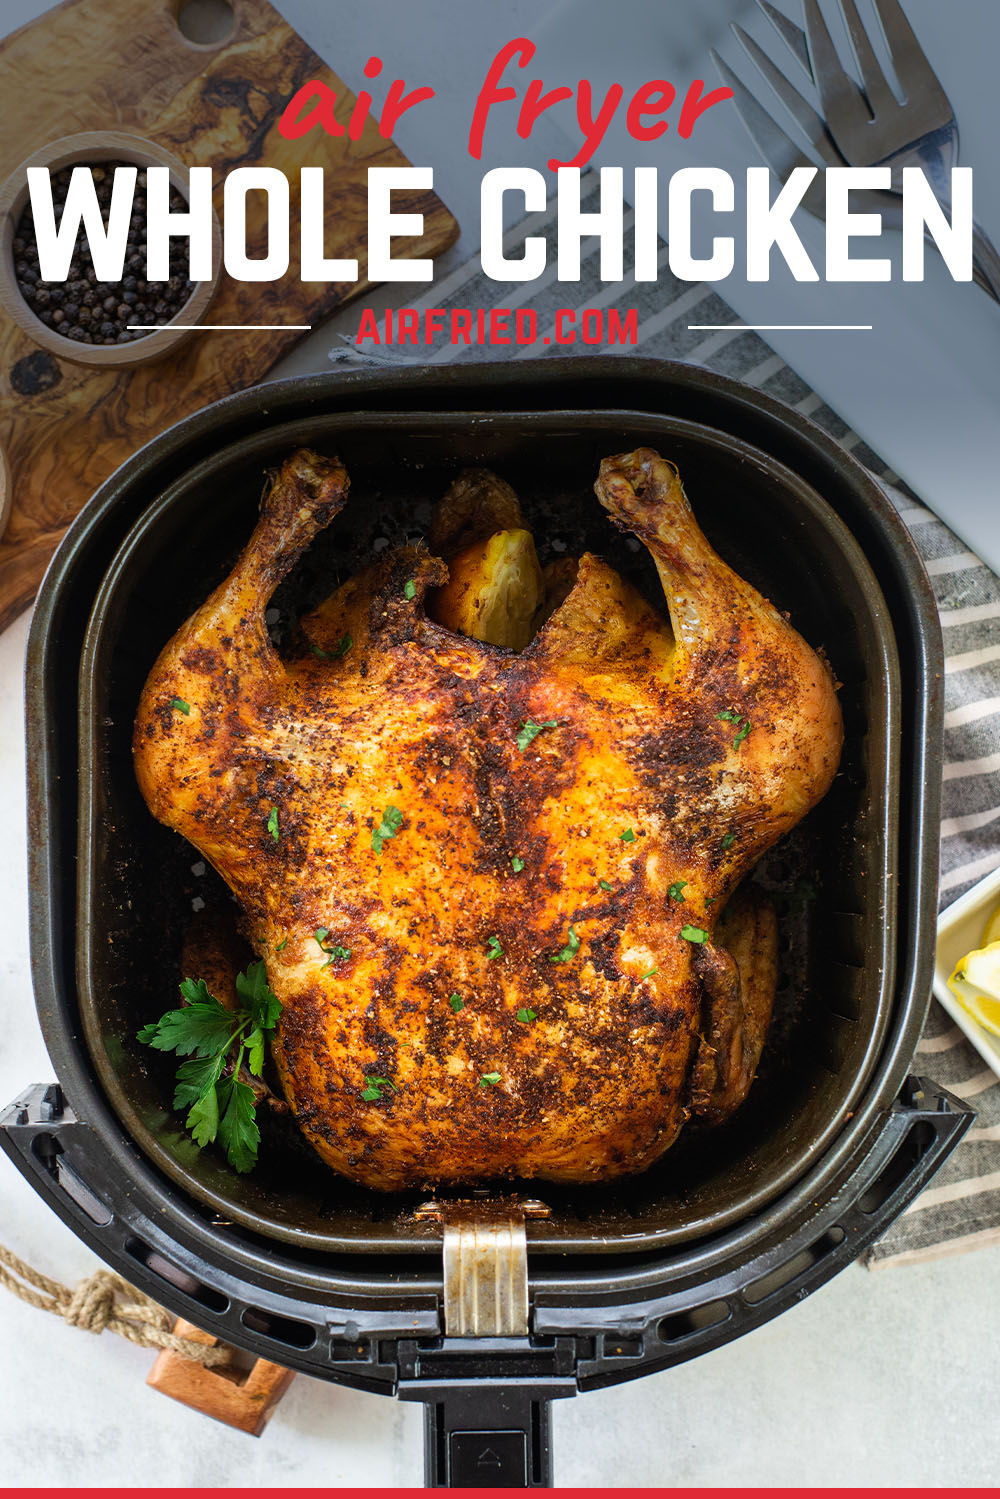 Roasting a whole chicken in the air fryer is simple and turns out just perfect every time!